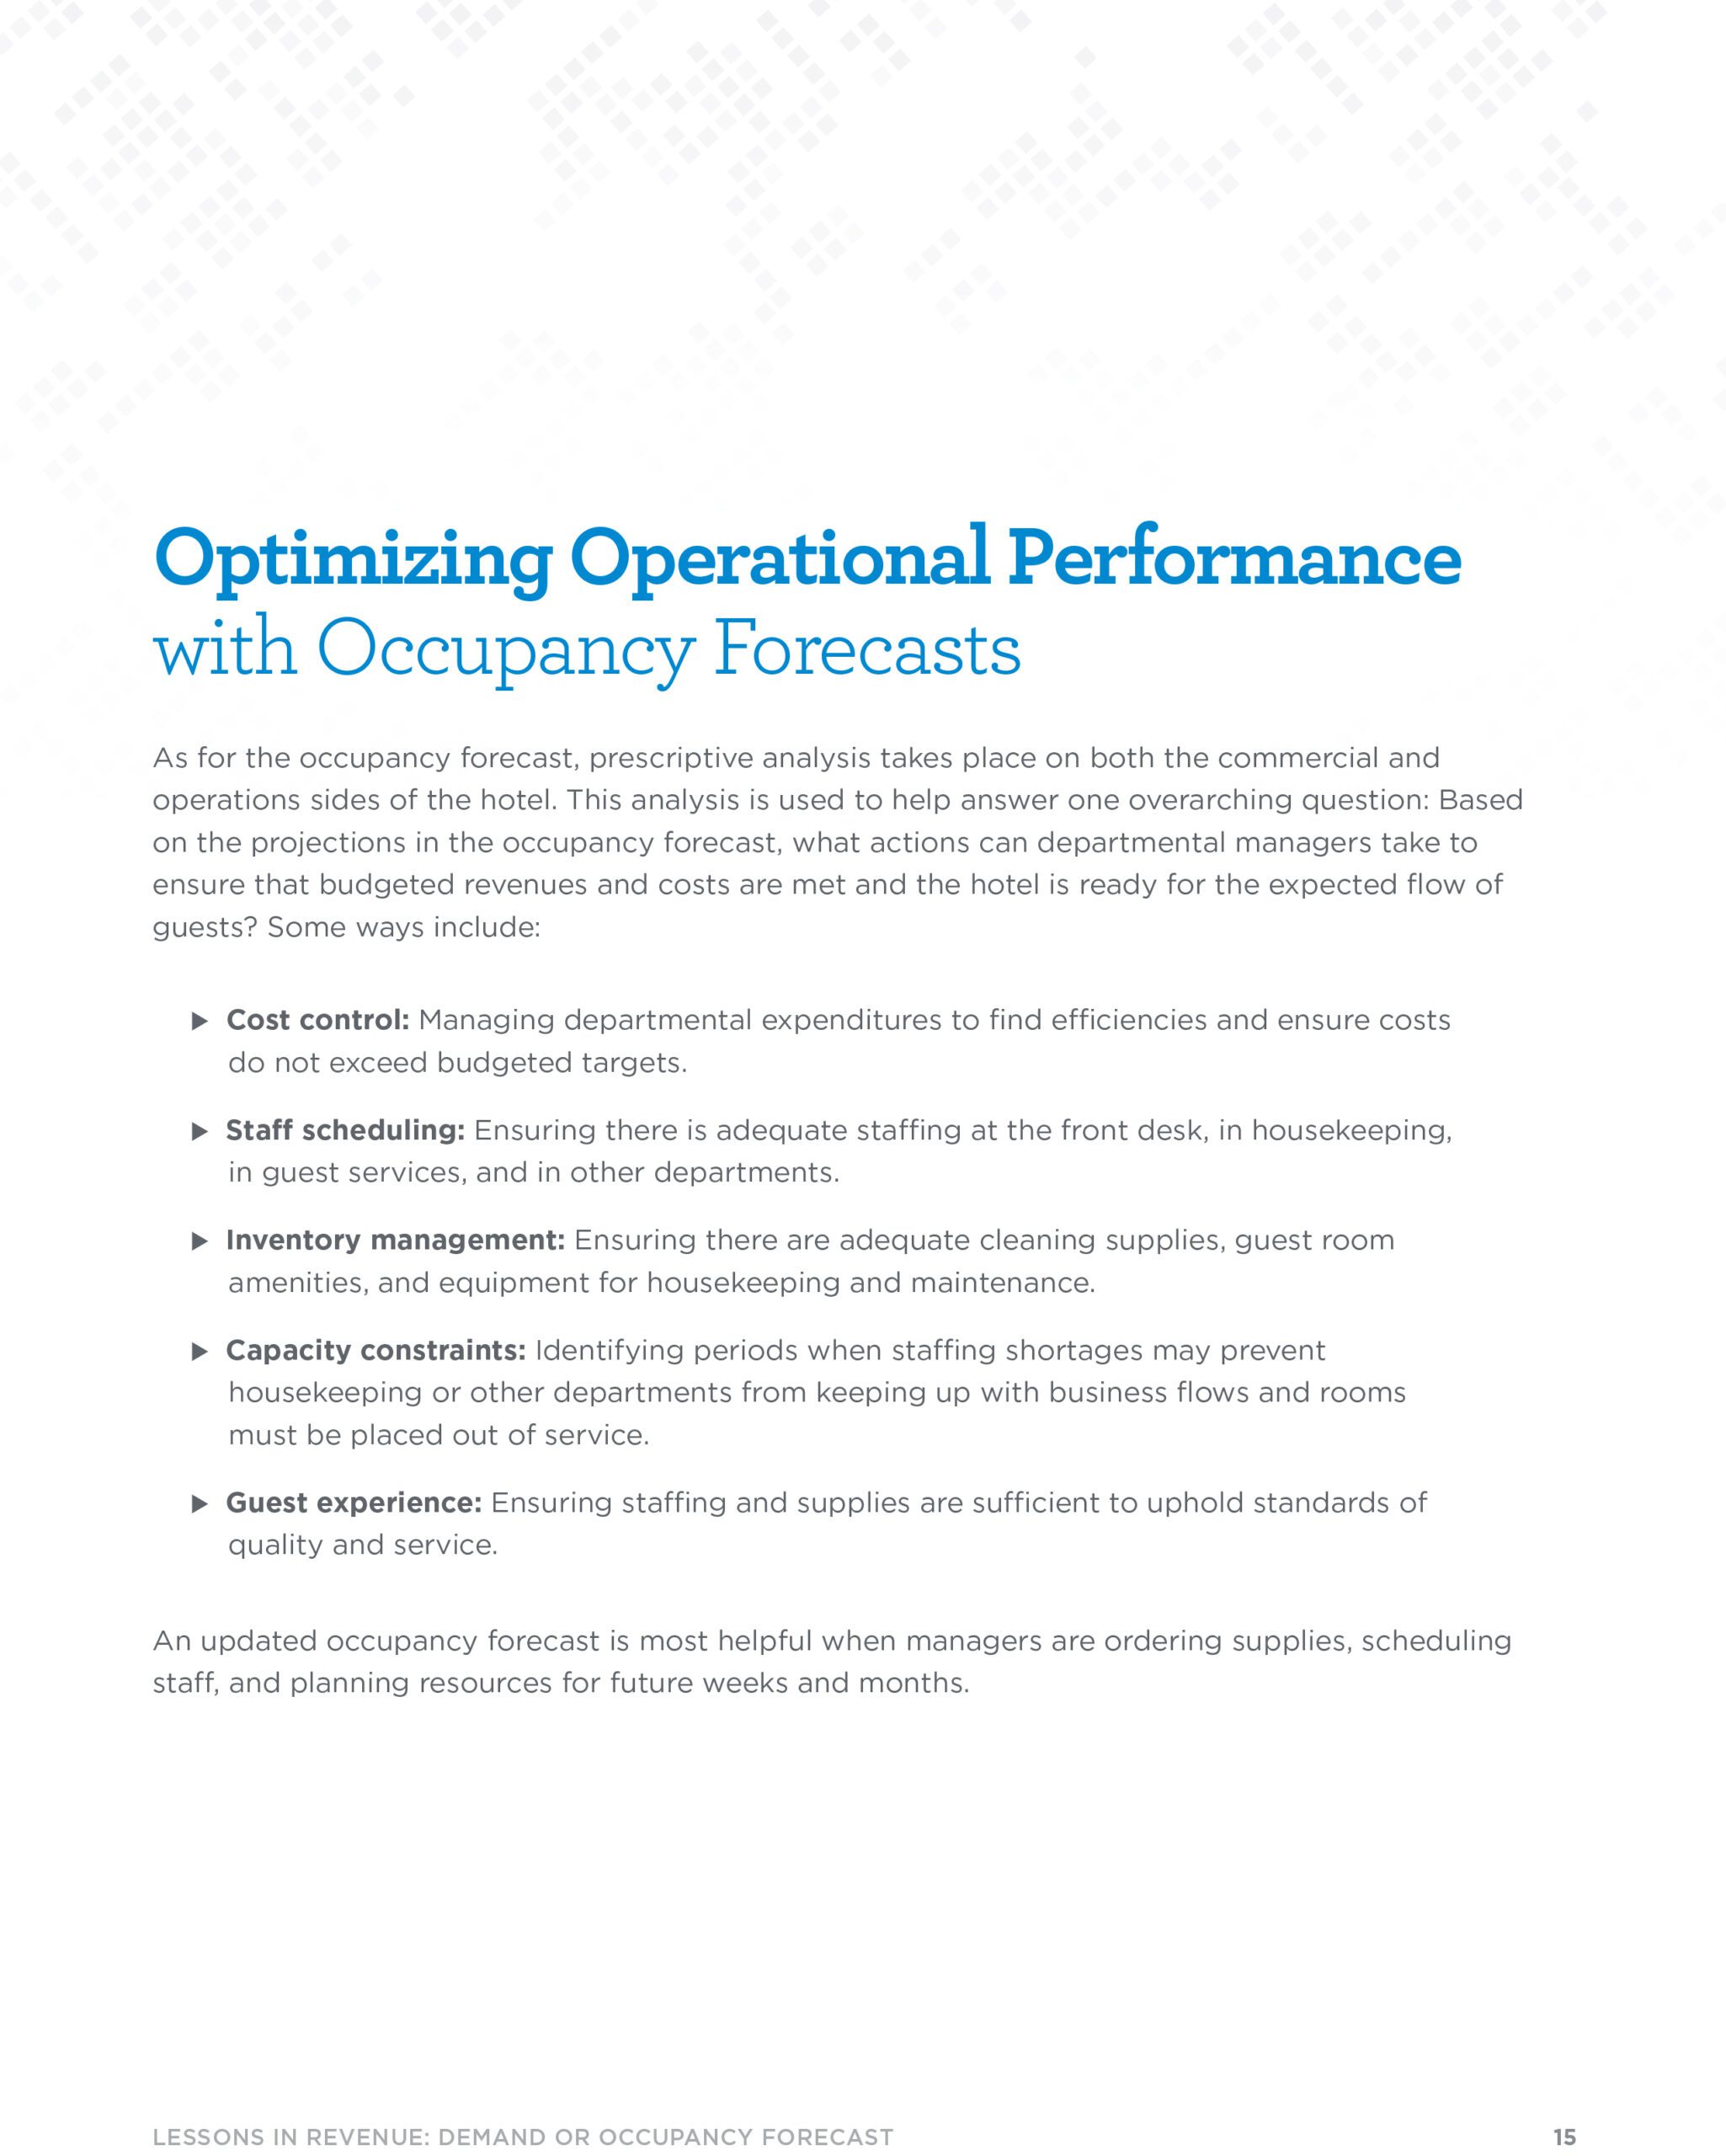 Page 14 - Optimizing Operational Performance with Occupancy Forecasts